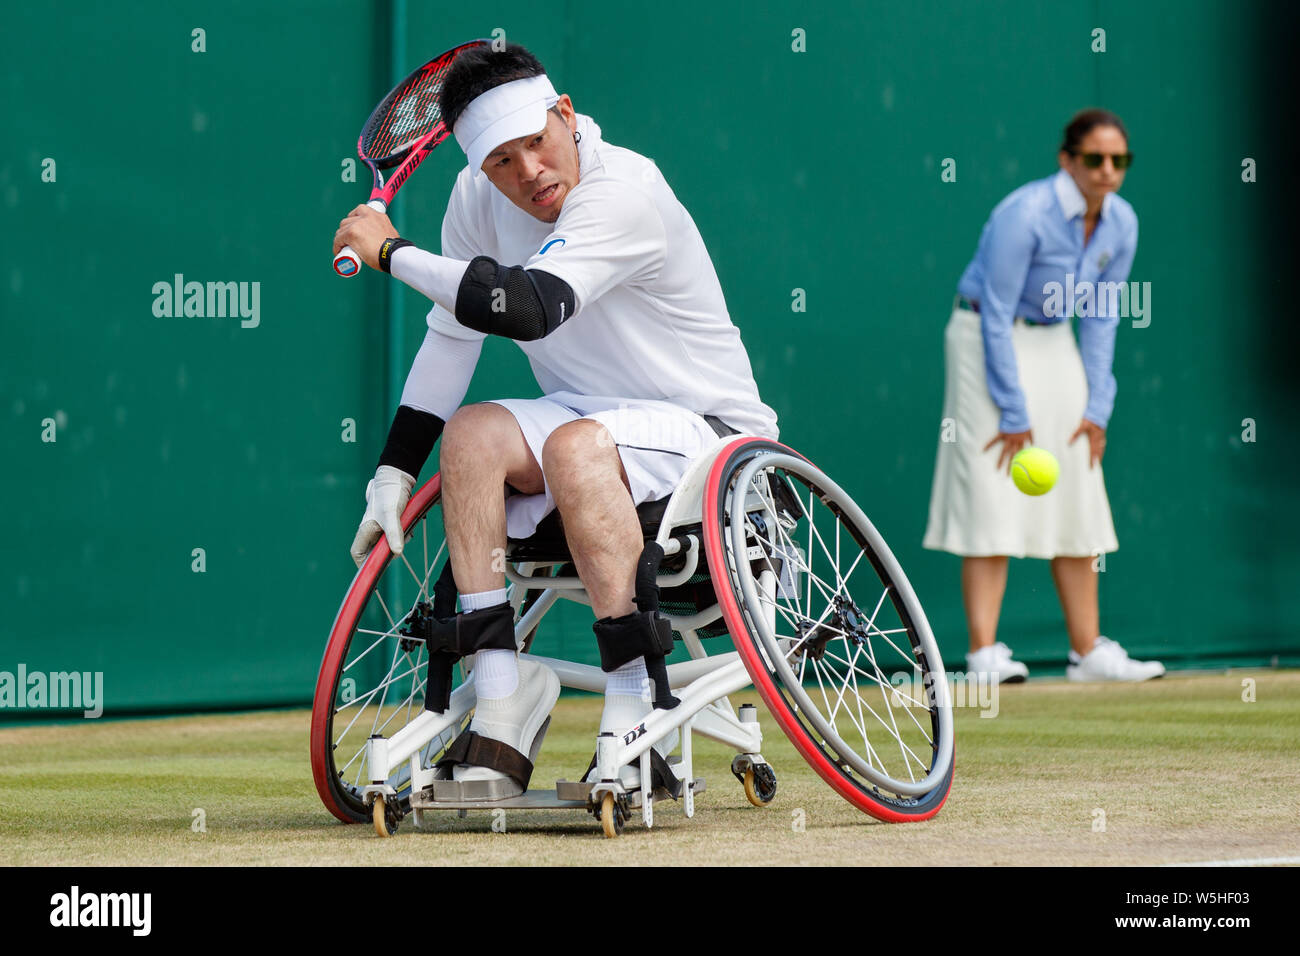 Koji Sugeno of Japan playing Quad Singles at The Championships , Wimbledon 2019 with Number 1 Court behind. Held at The All England Lawn Tennis Club, Stock Photo